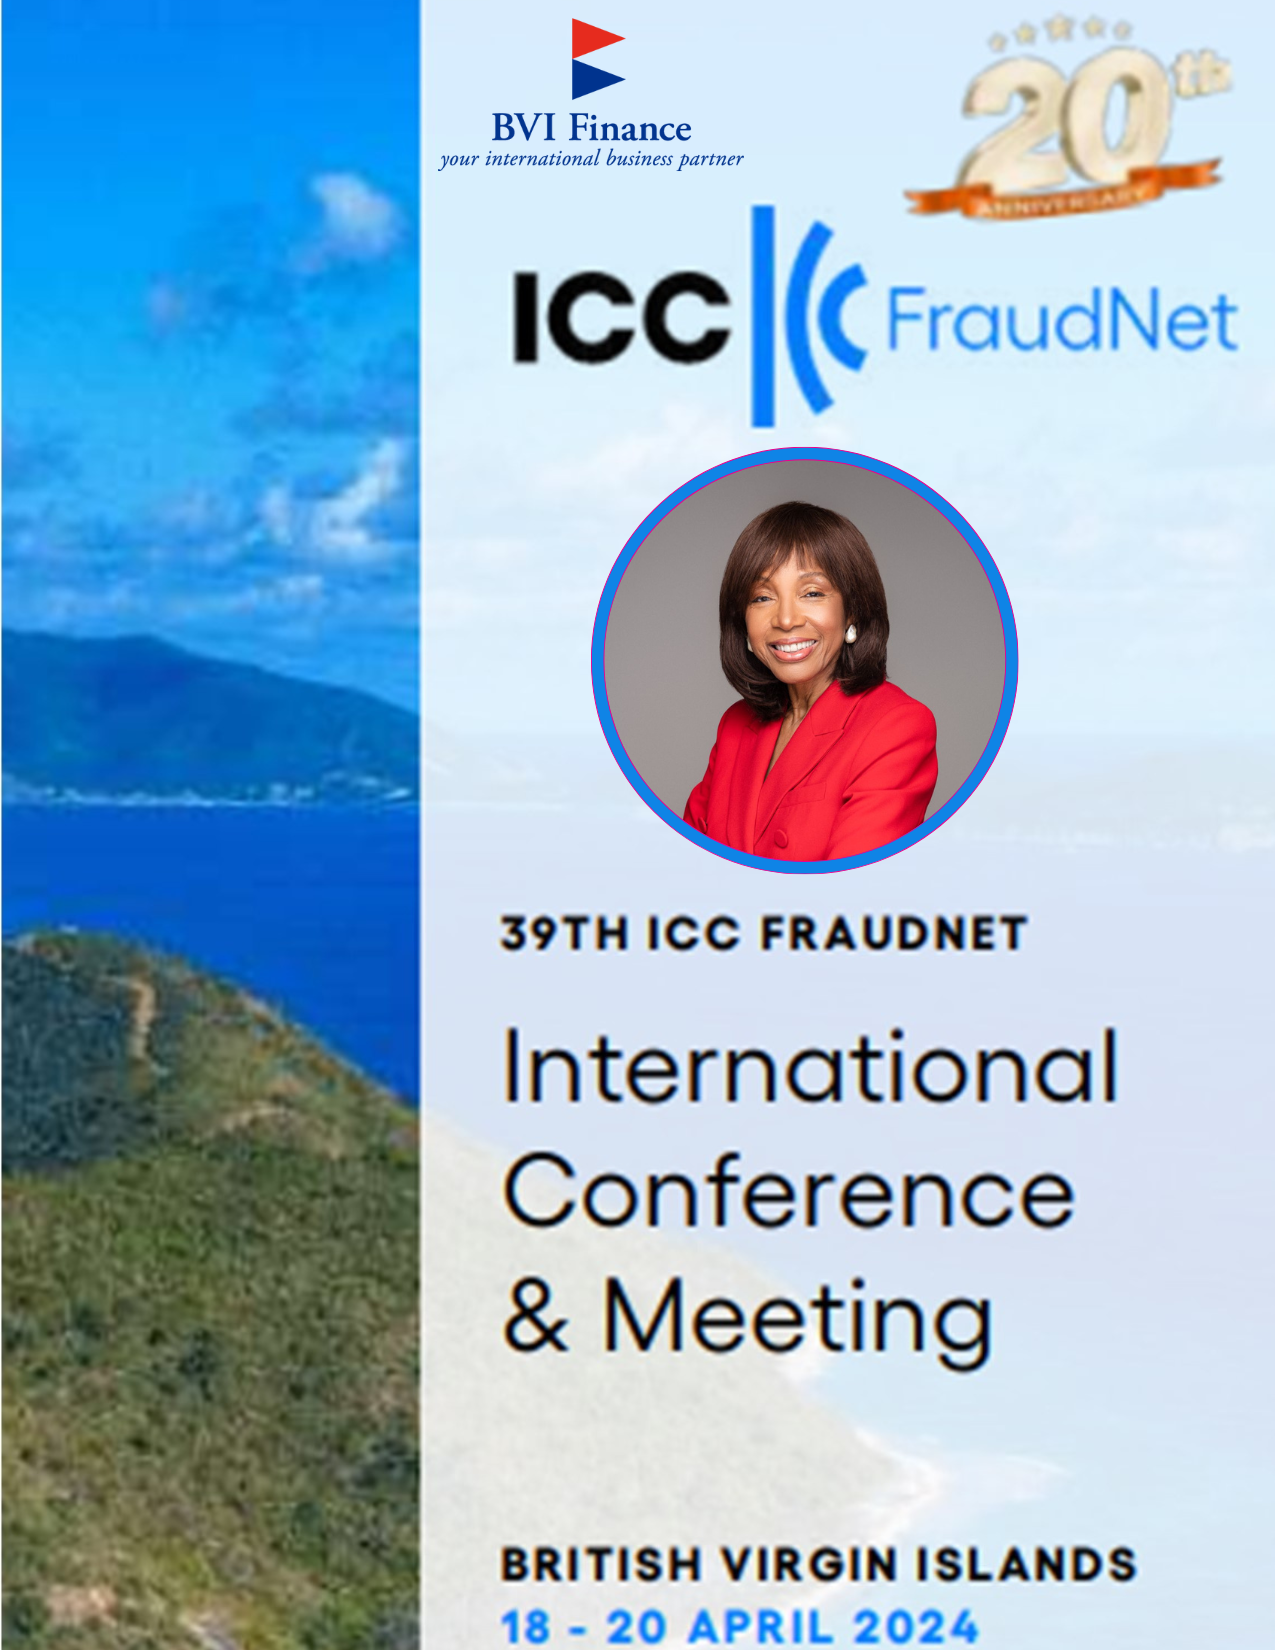 BVI FINANCE PARTNERS WITH ICC FRAUDNET INTERNATIONAL CONFERENCE FOR 20TH ANNIVERSARY CELEBRATION IN THE BVI